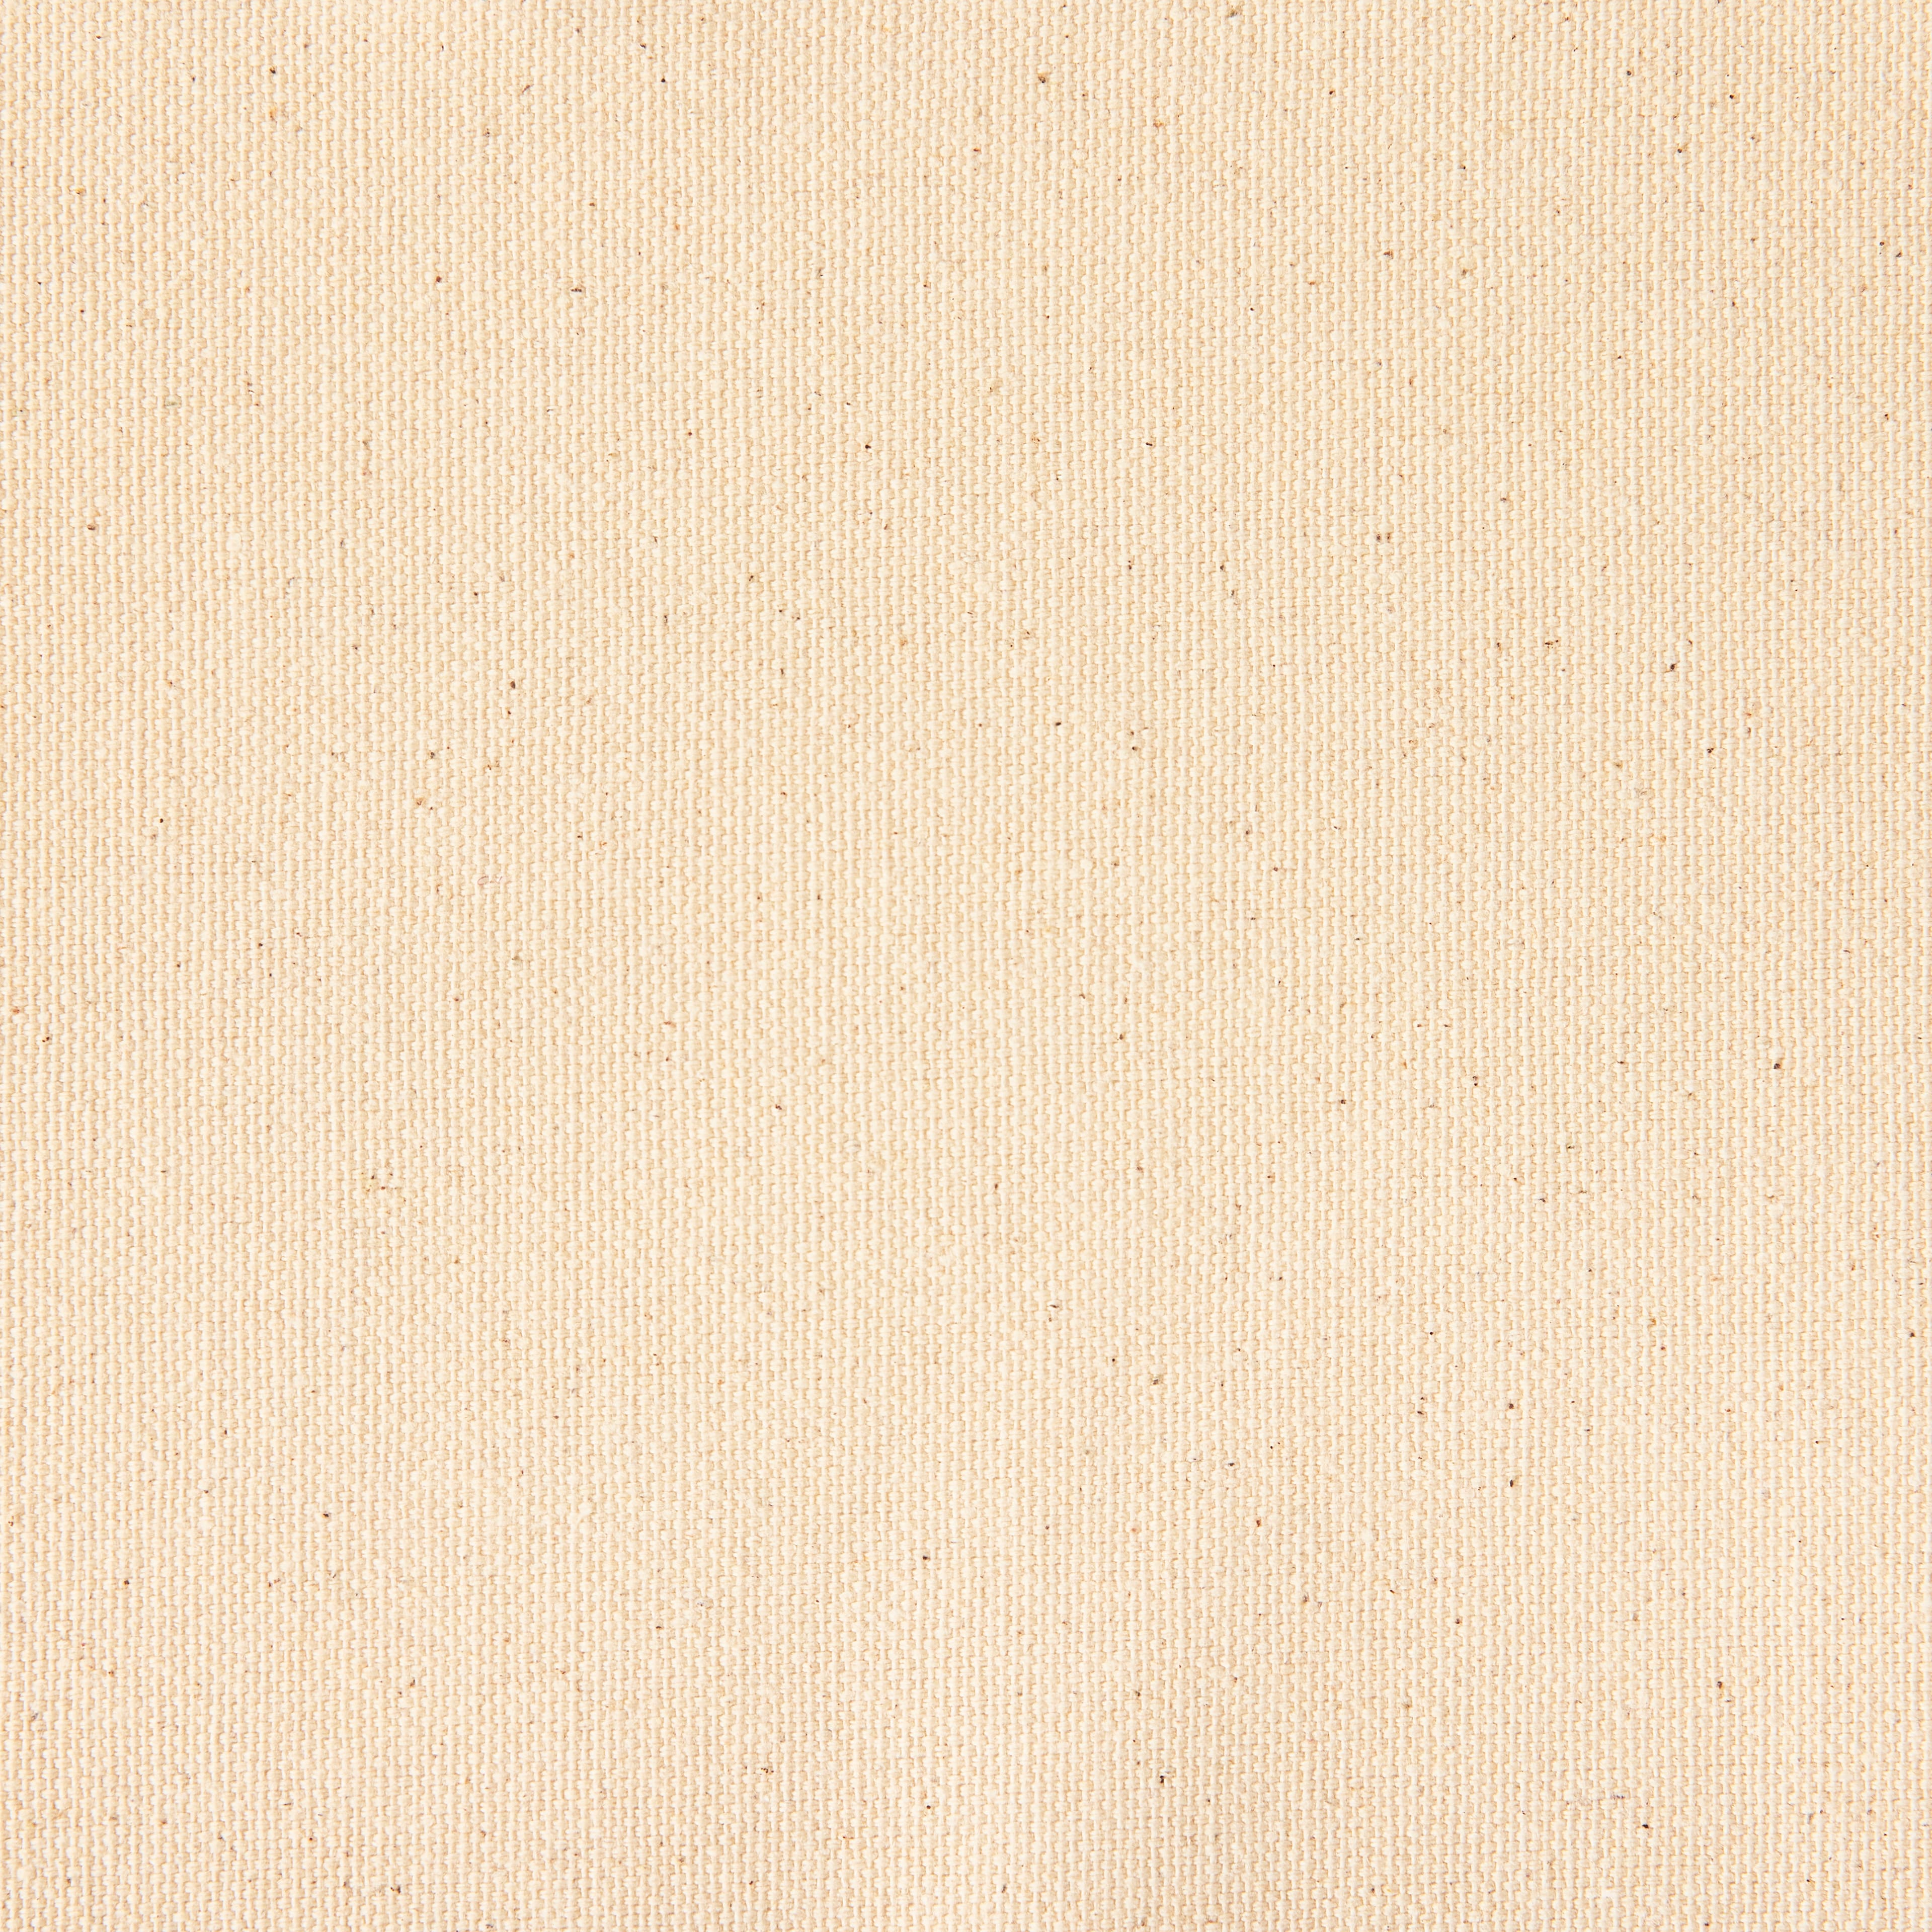 10 yd. Full Bolt: Natural Cotton Duck Canvas